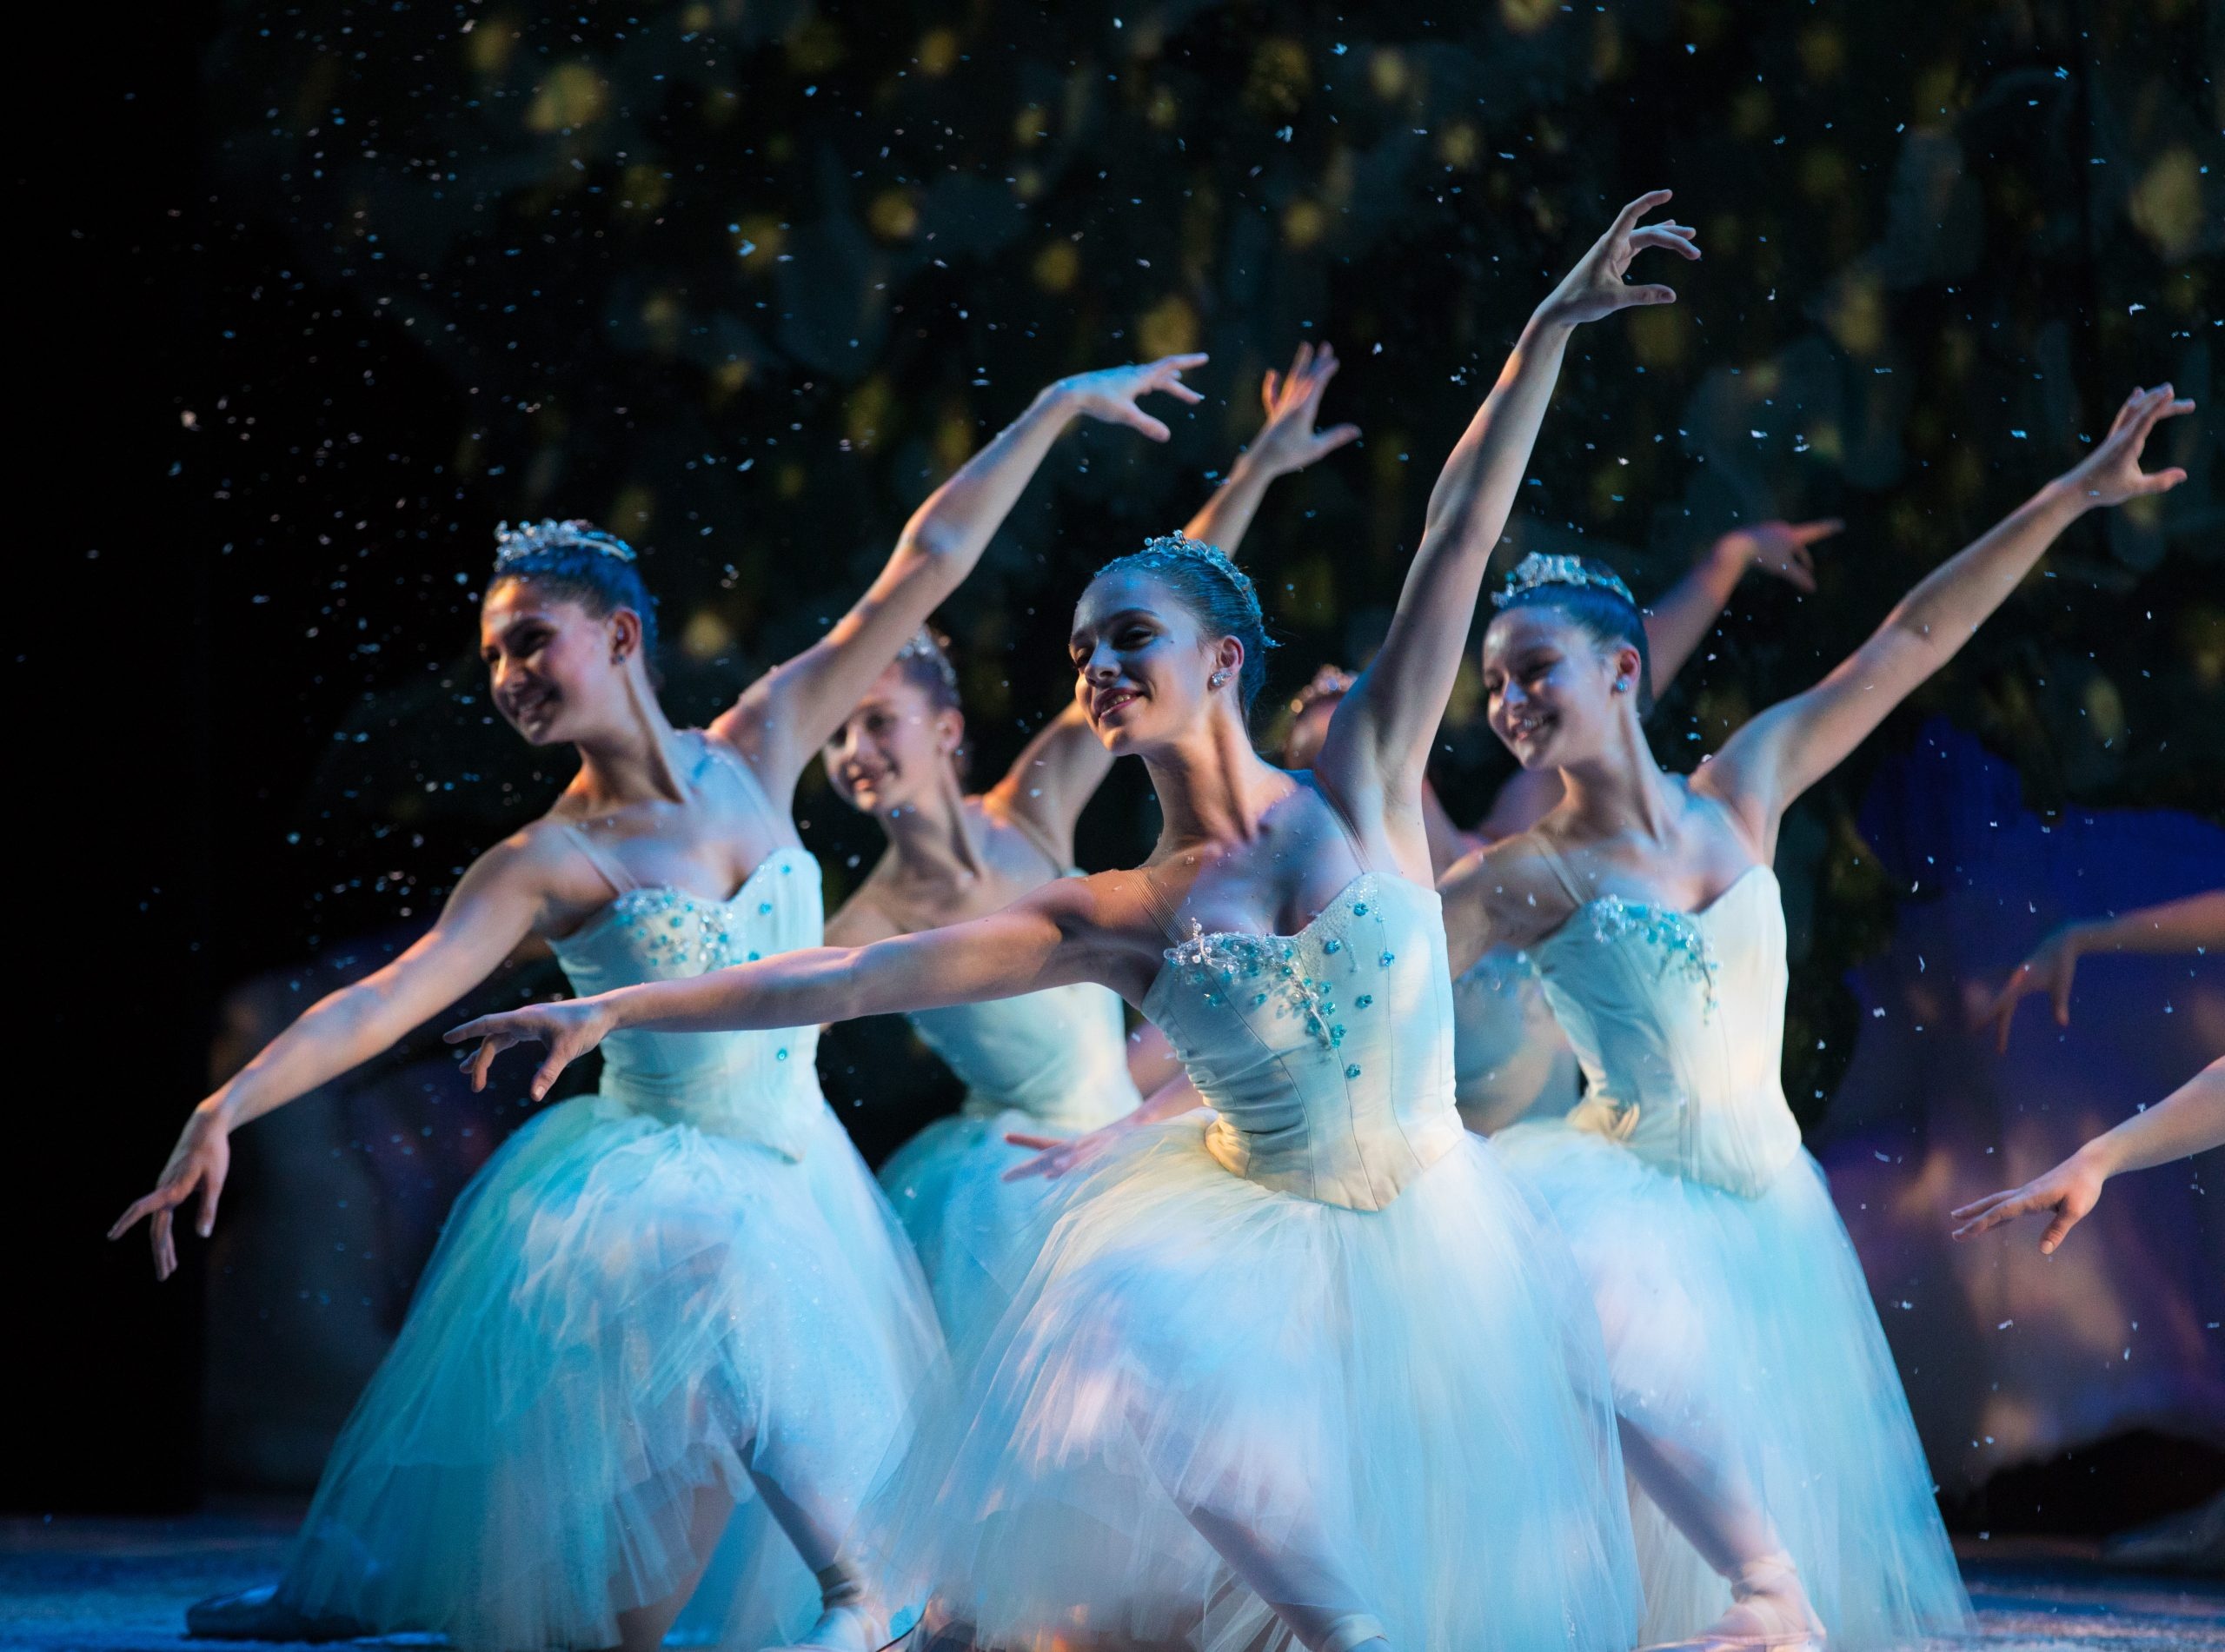 Nutcracker: Pioneer Valley Ballet, Performing this holiday classic for over 40 years. 2560x1910 HD Wallpaper.